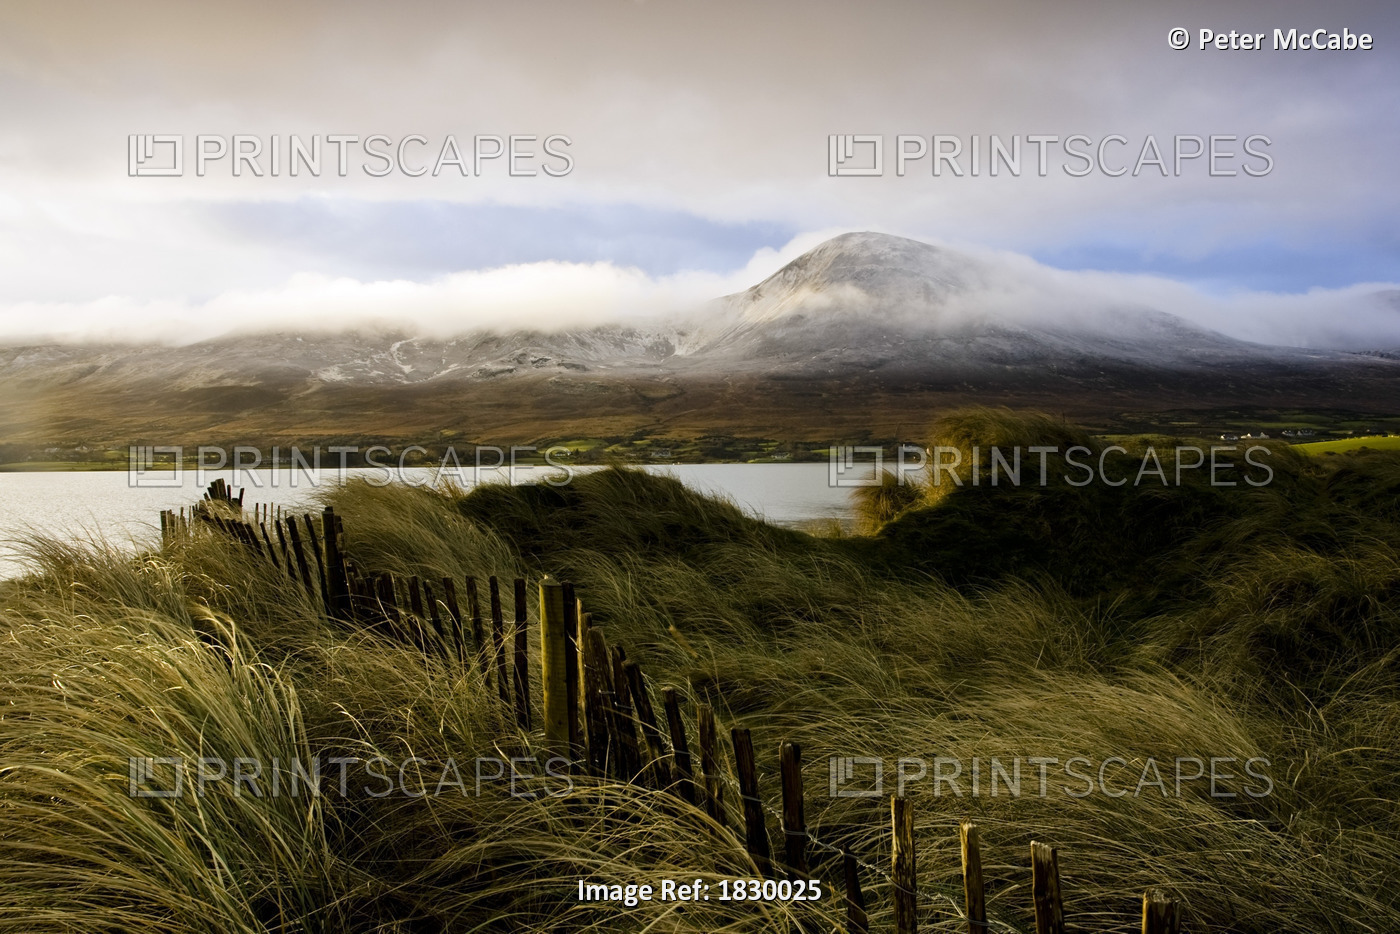 Croagh Patrick, County Mayo, Ireland; Mountain Scenic After Snow Storm